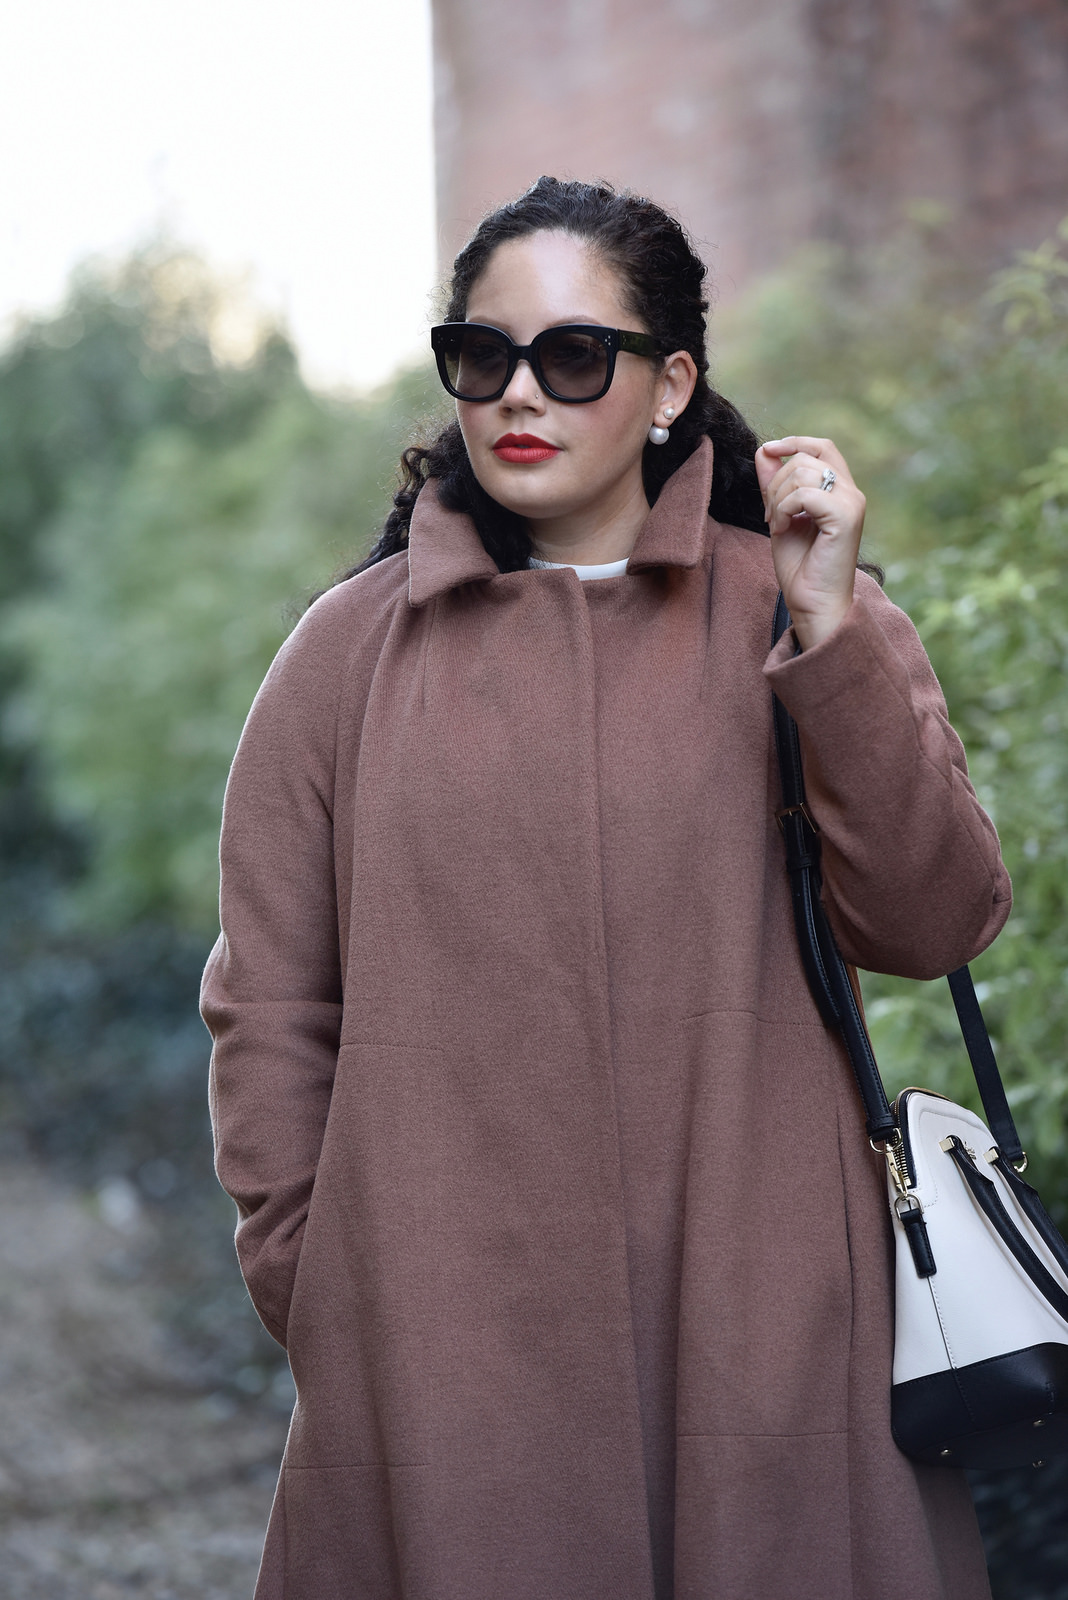 Girl With Curves featuring a vintage inspired trapeze coat from Asos.